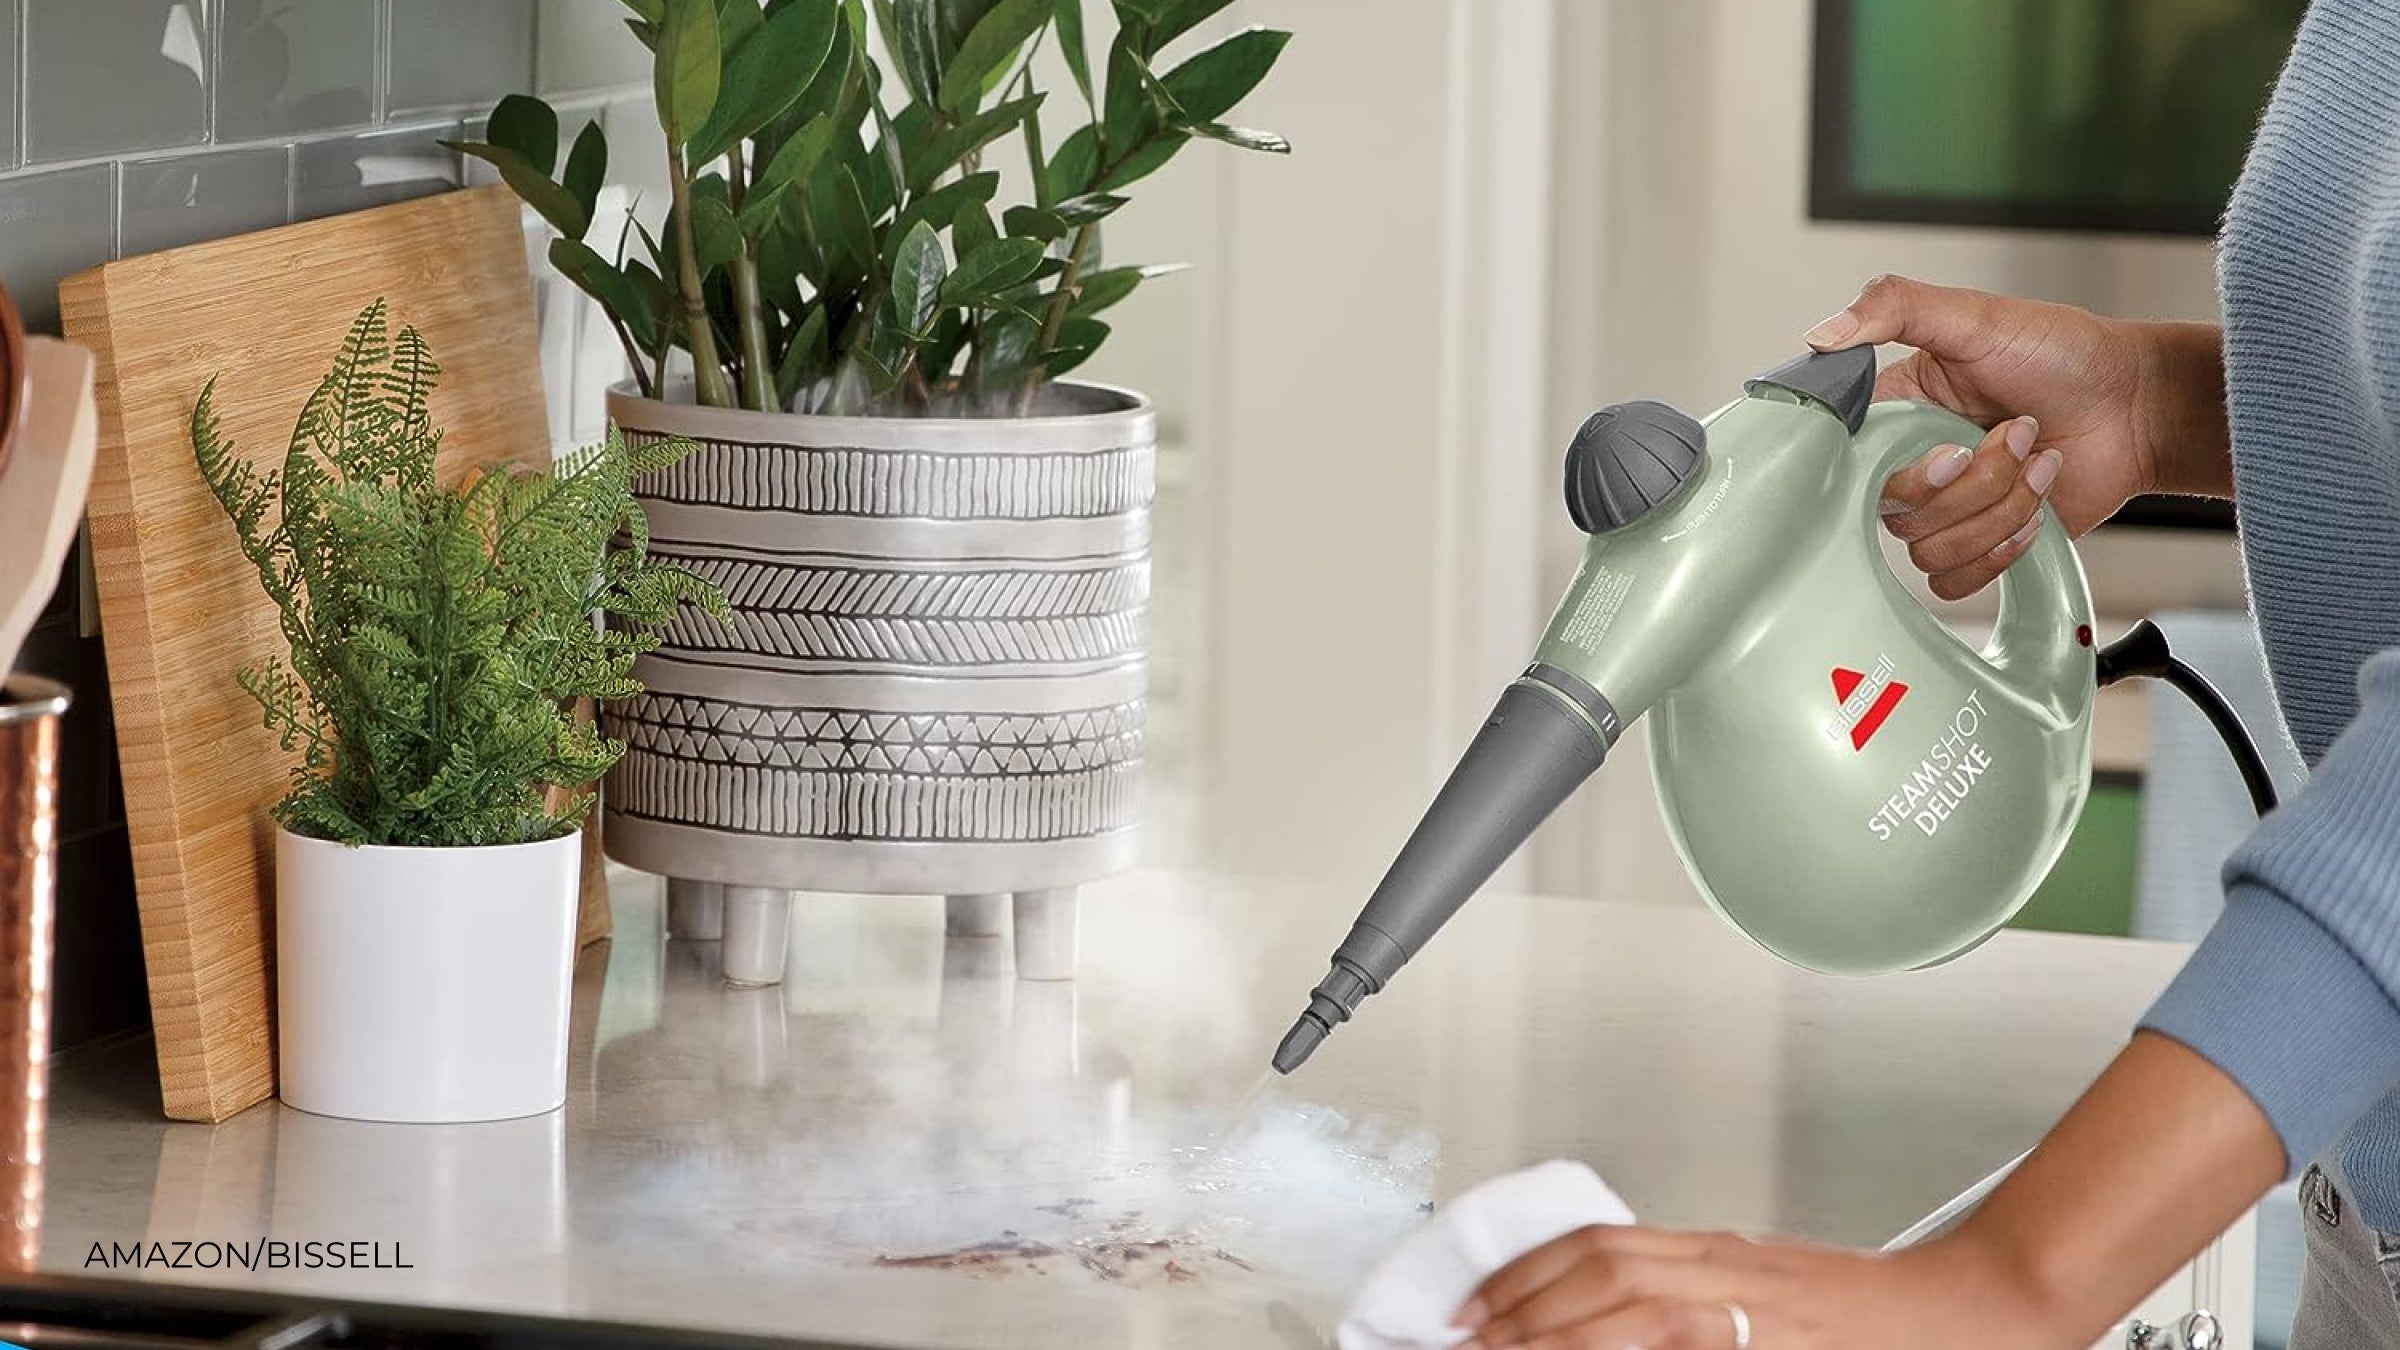 A green steam cleaner being used to clean a kitchen countertop